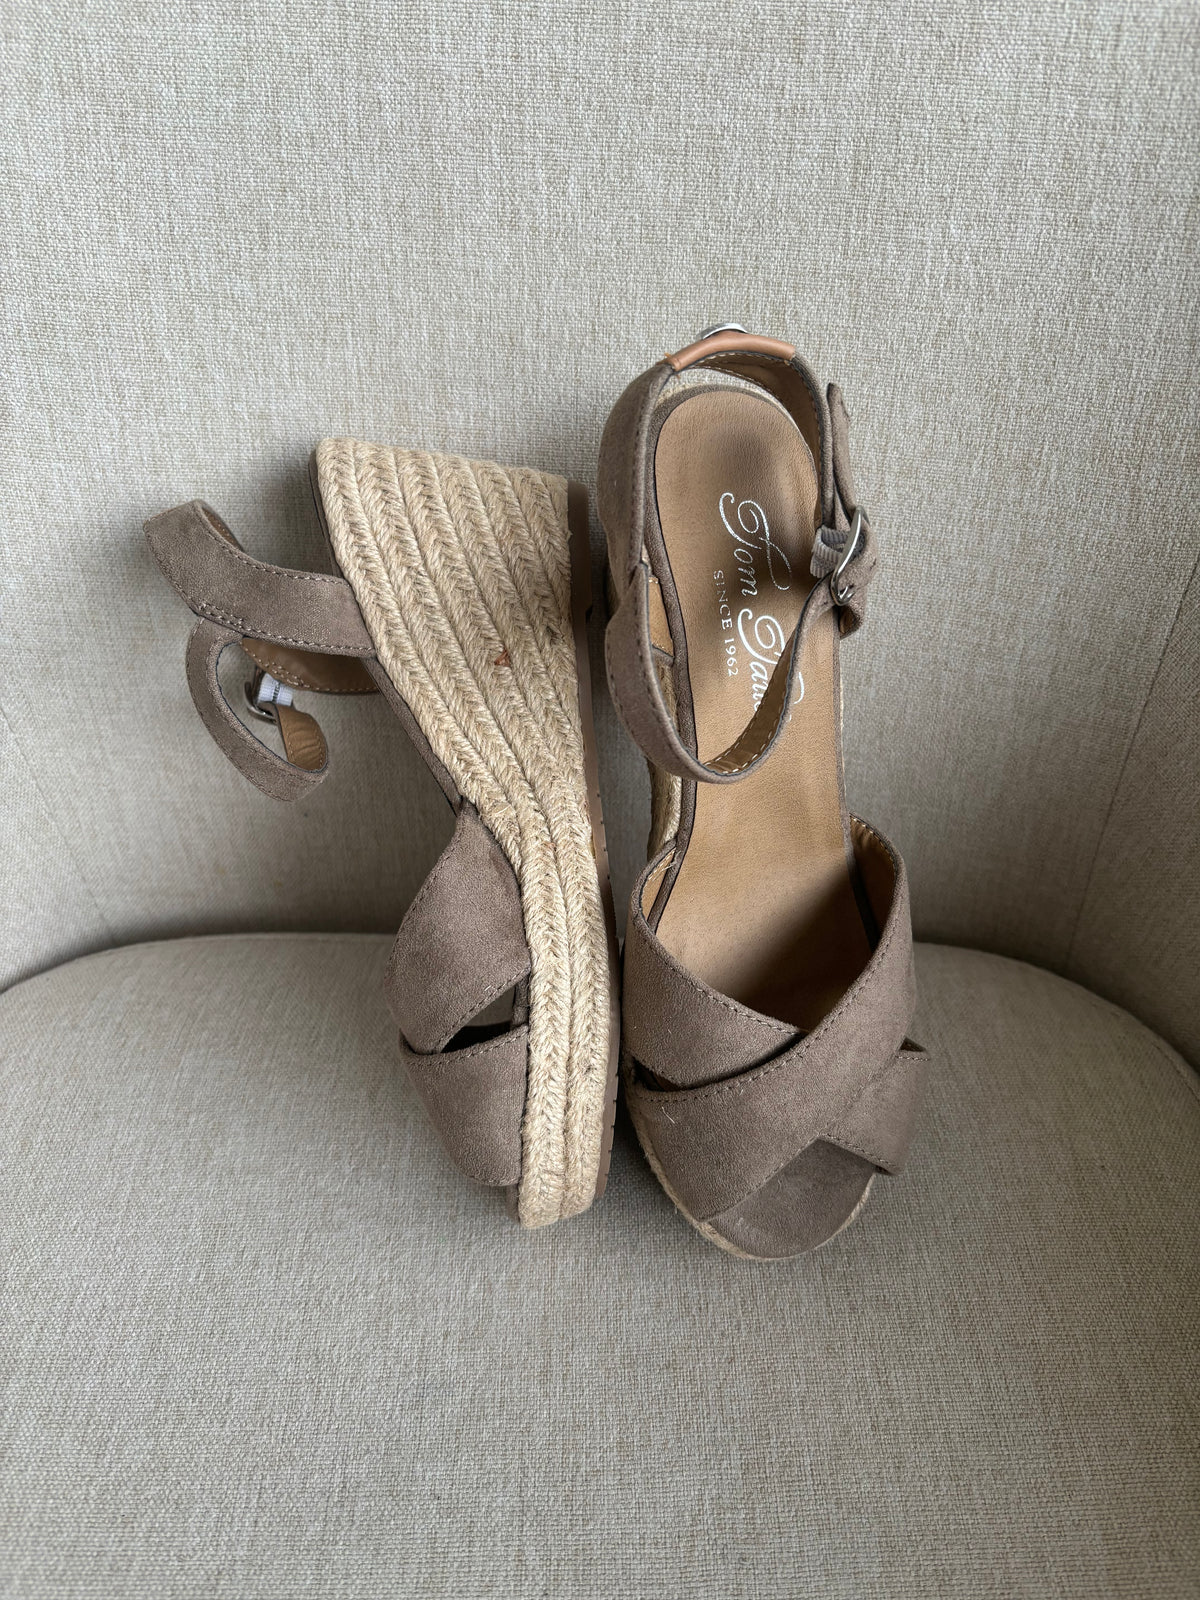 Tom Tailor Taupe Brown Wedge Sandals Size 4 UK